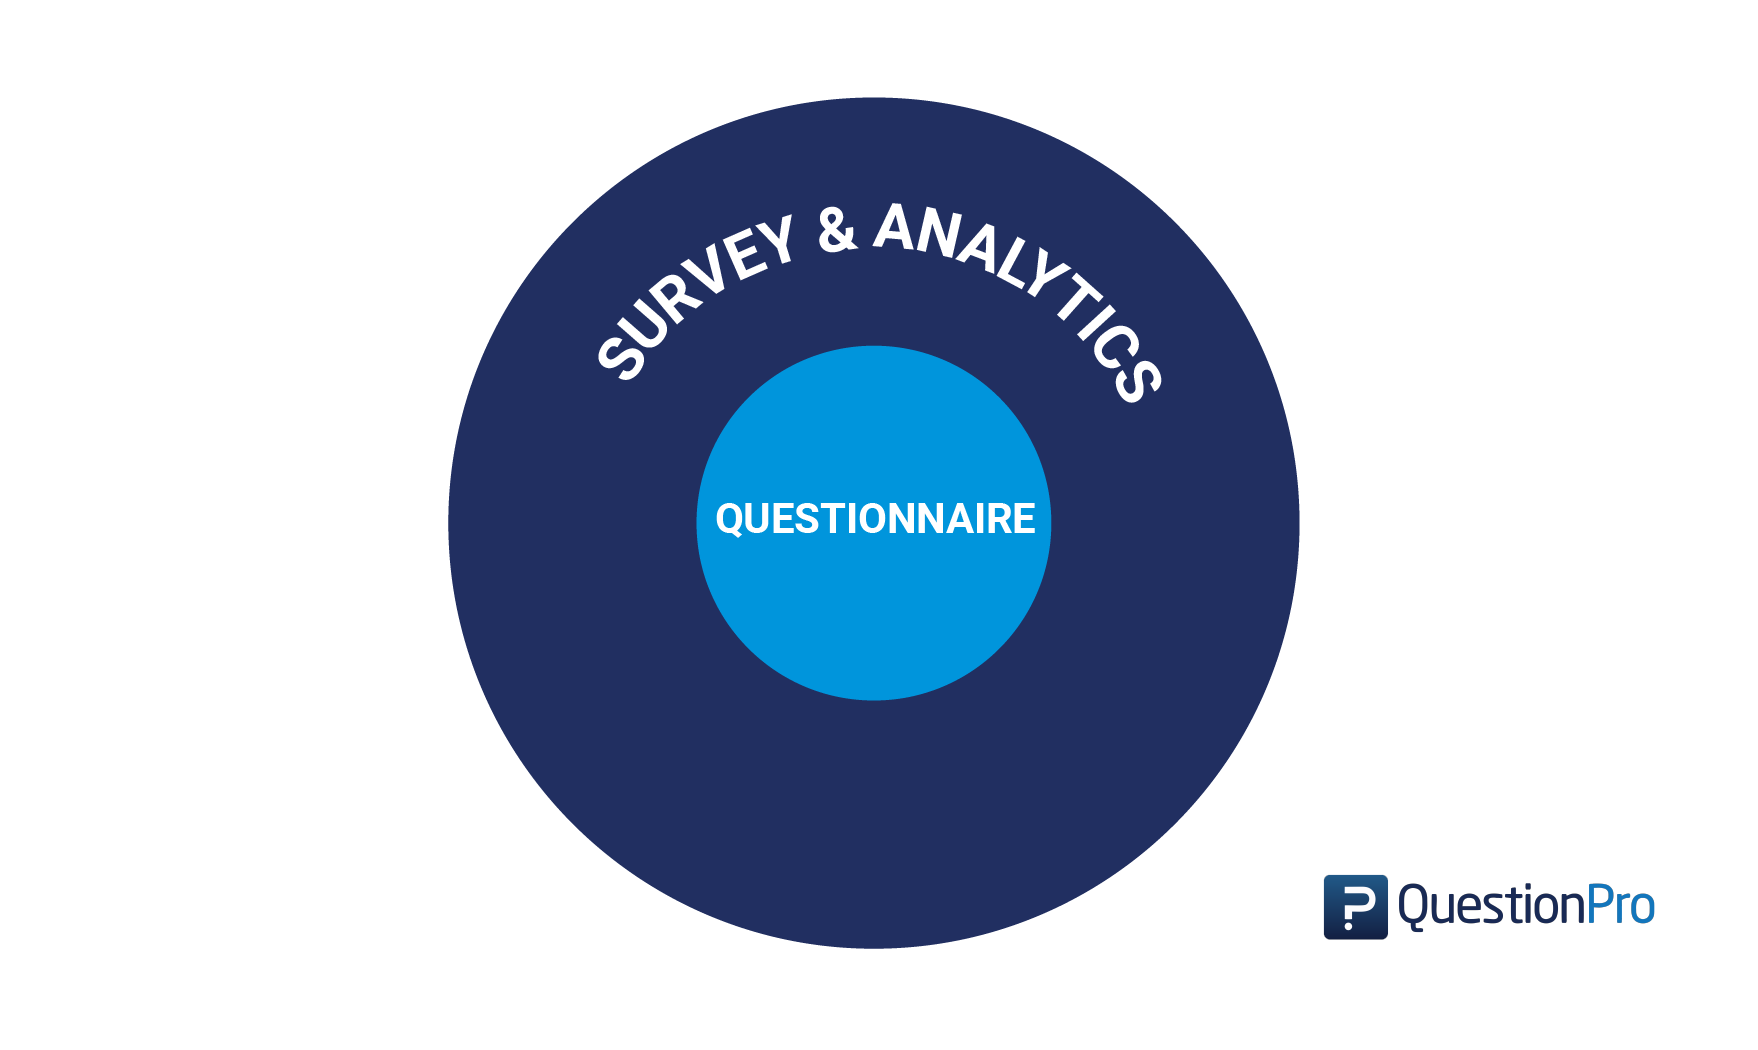 What Is A Survey (or Questionnaire)?